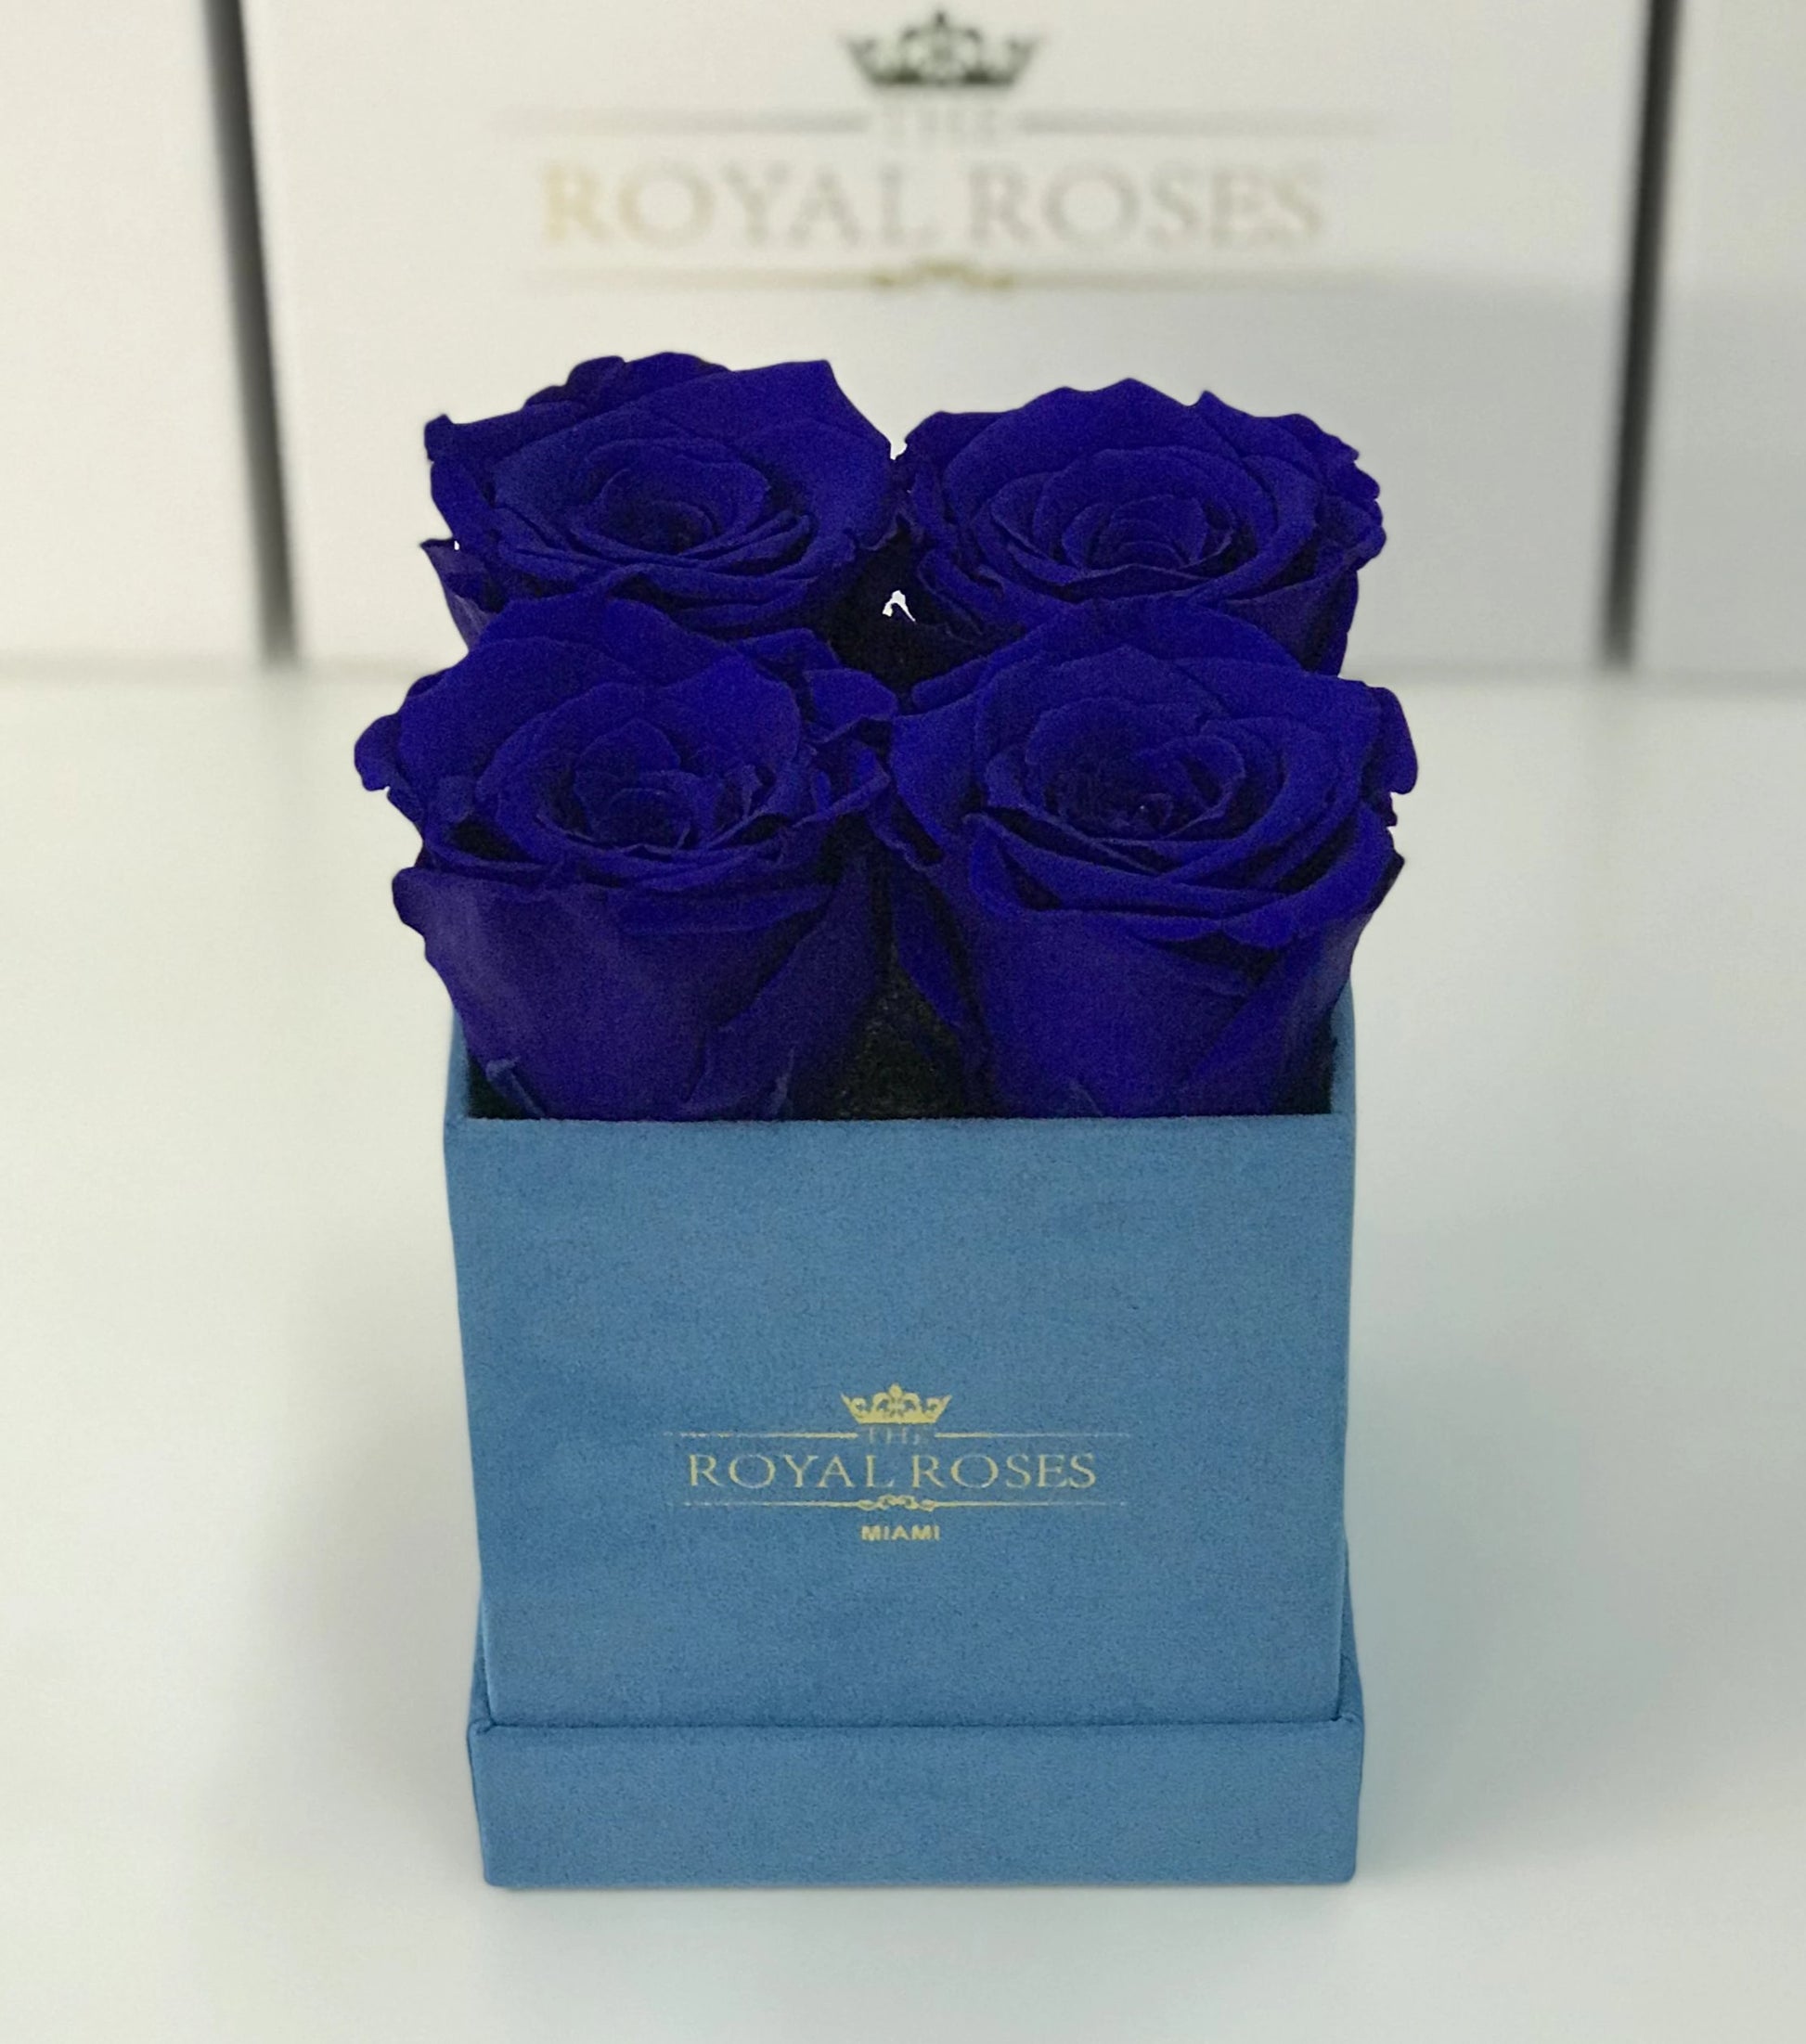 Mini Square Long Lasting Rose Box - Lifetime is Over 1 Year - The Royal Roses 